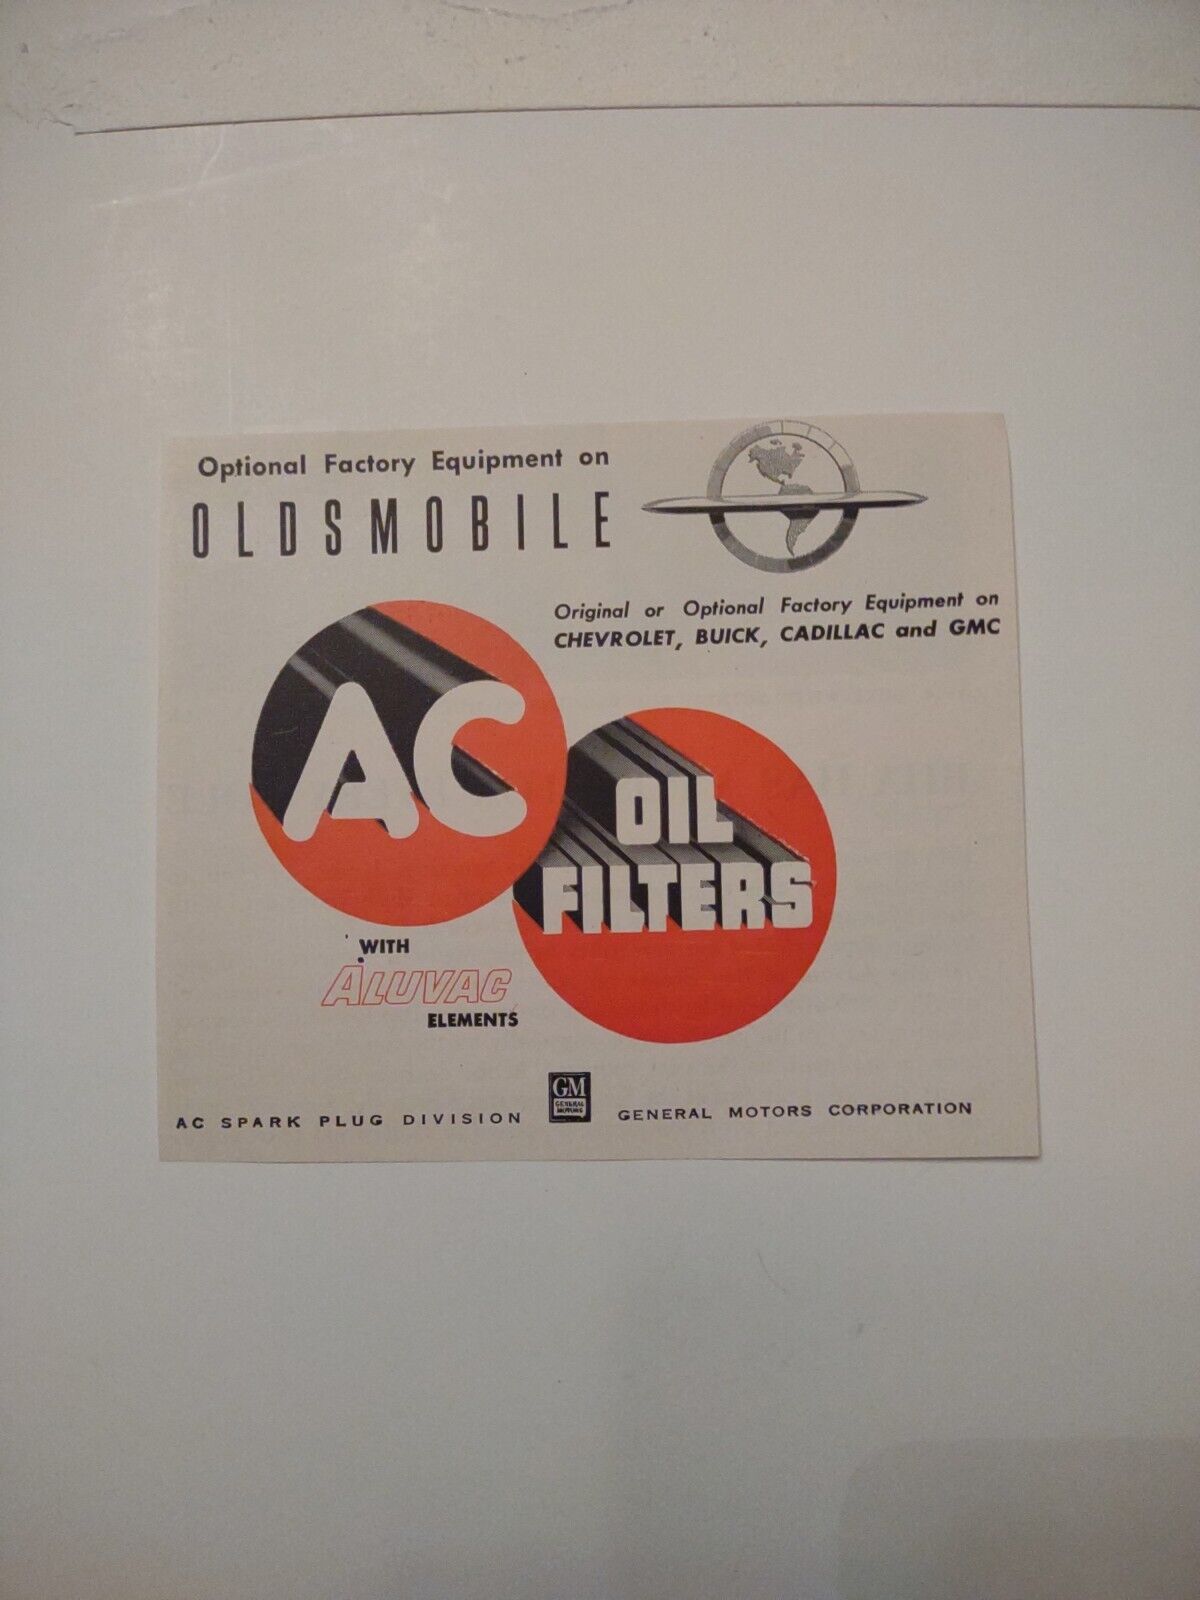 Print Ad For AC OIL FILTERS OLDSMOBILE